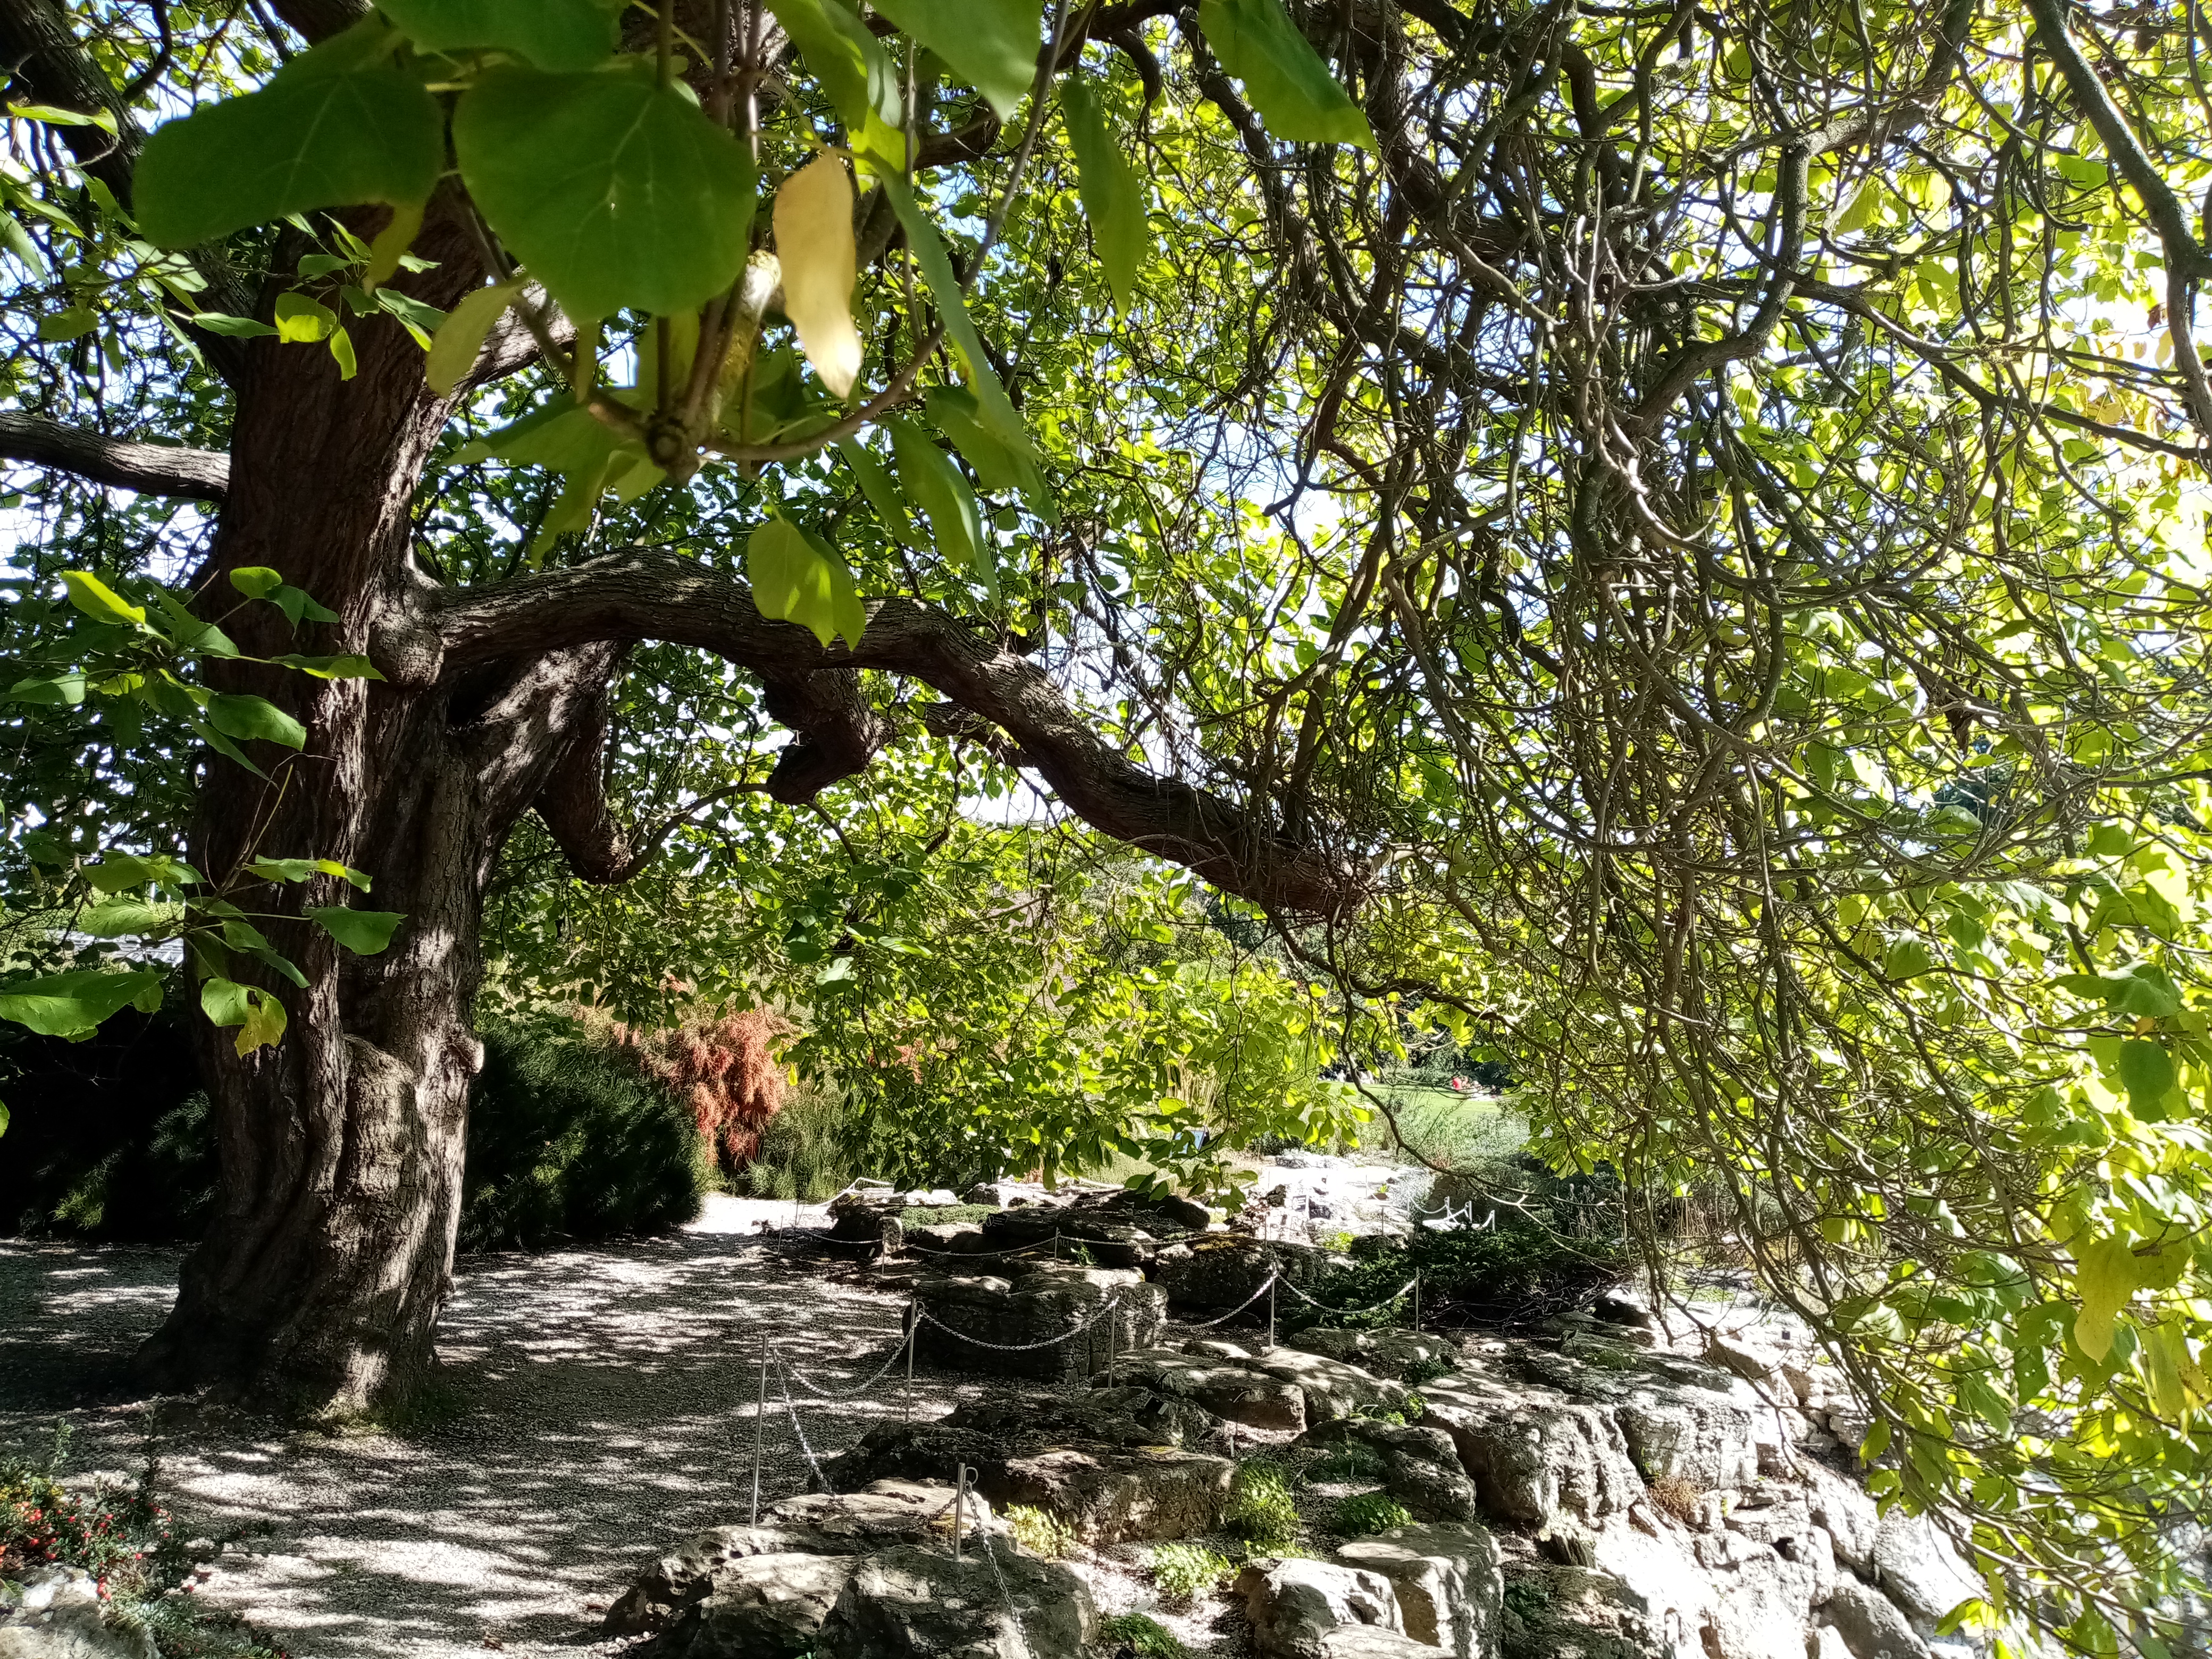 A tree with a large tree trunk and branches and green leaves that swoop downwards. The tree is situated on tarmac which is surrounded by rock.